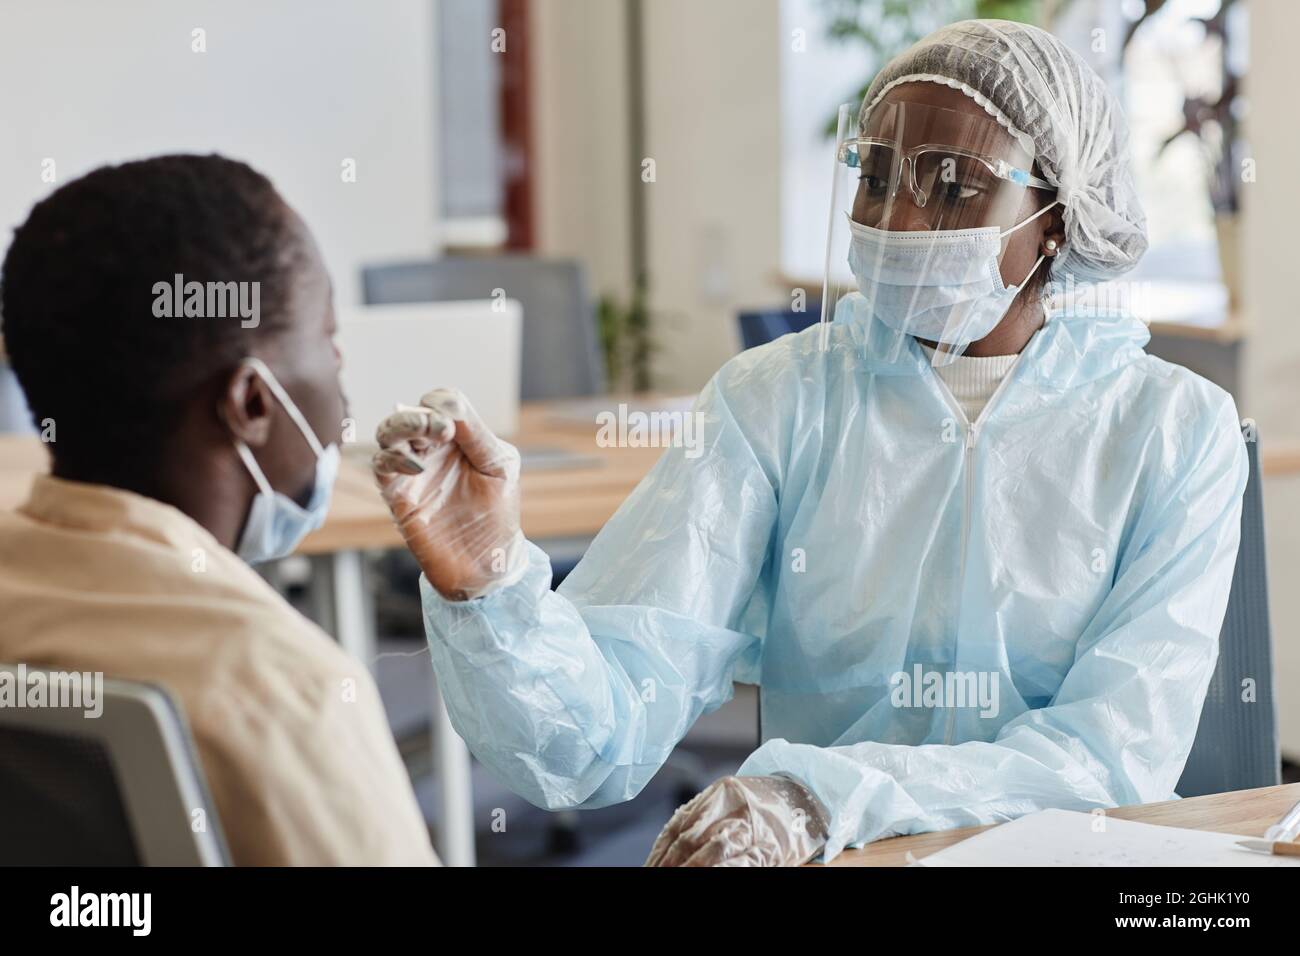 Medical nurse in protective suit and face shield telling patient to be ready for nasal swab for coronavirus testing Stock Photo